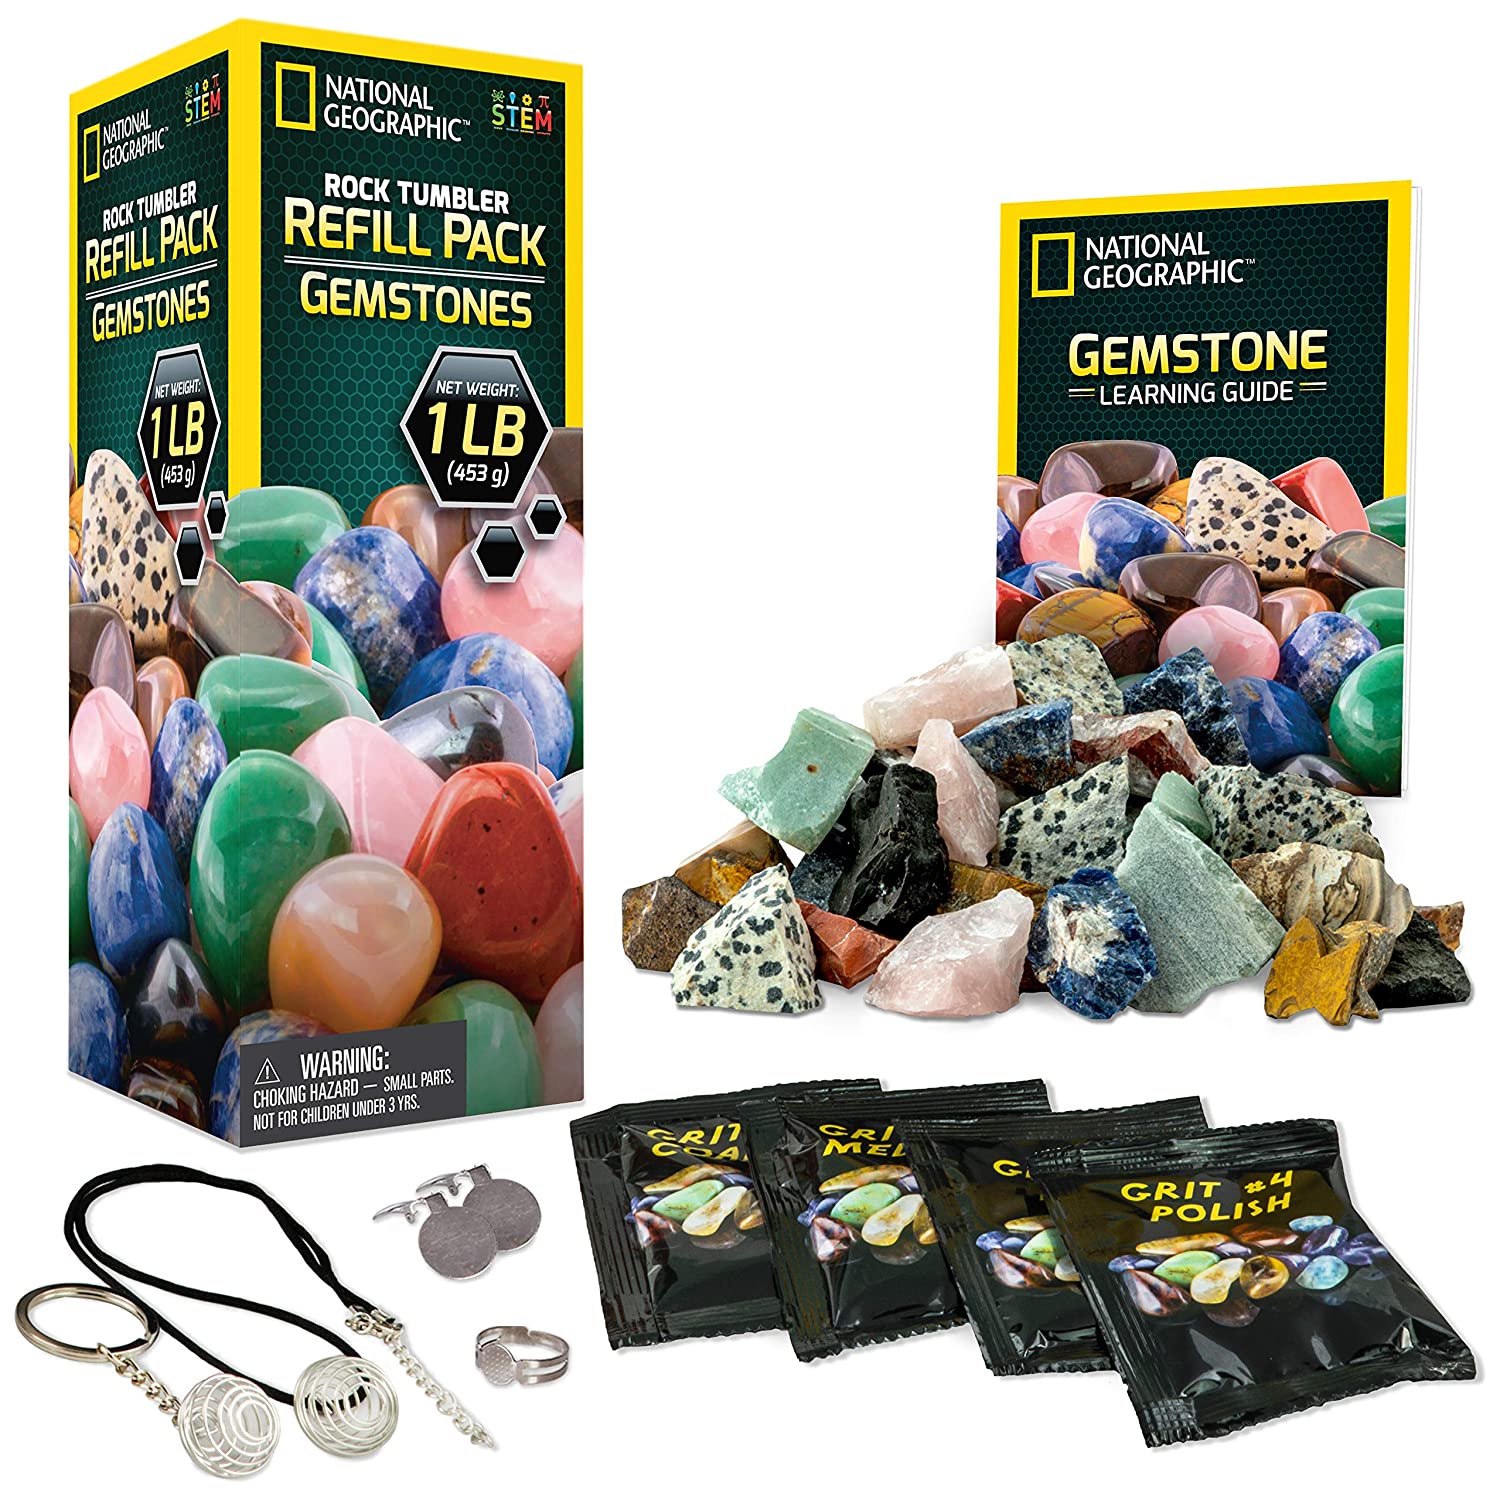 NATIONAL GEOGRAPHIC Rock Tumbler Refill Kit - Gemstone Mix of 9 varieties including Tiger's Eye, Amethyst and Quartz